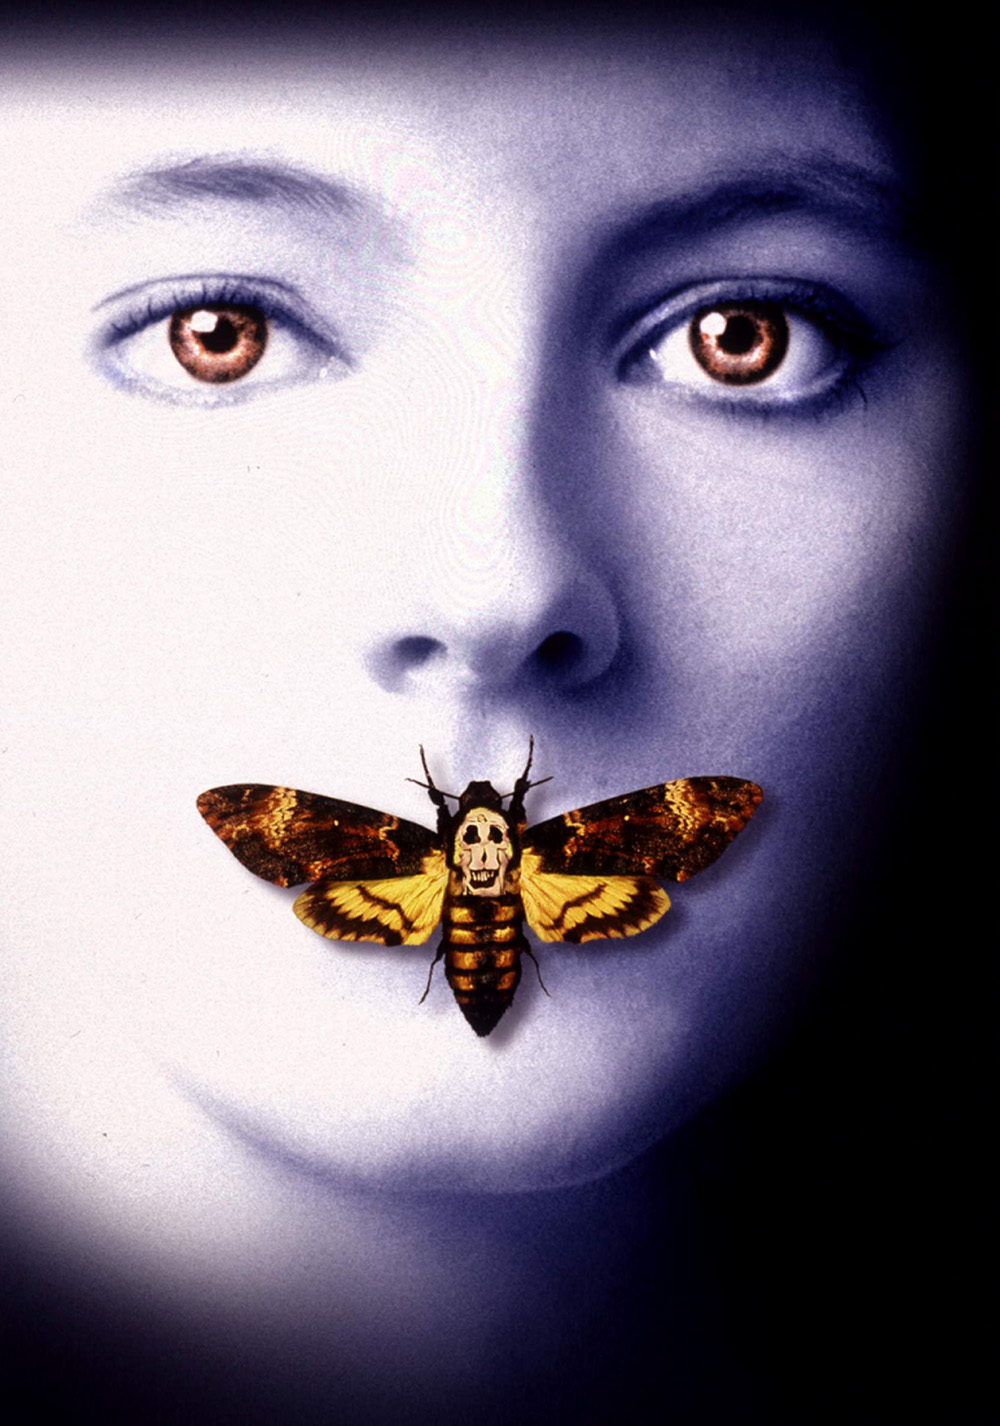 04 The Silence of the Lambs